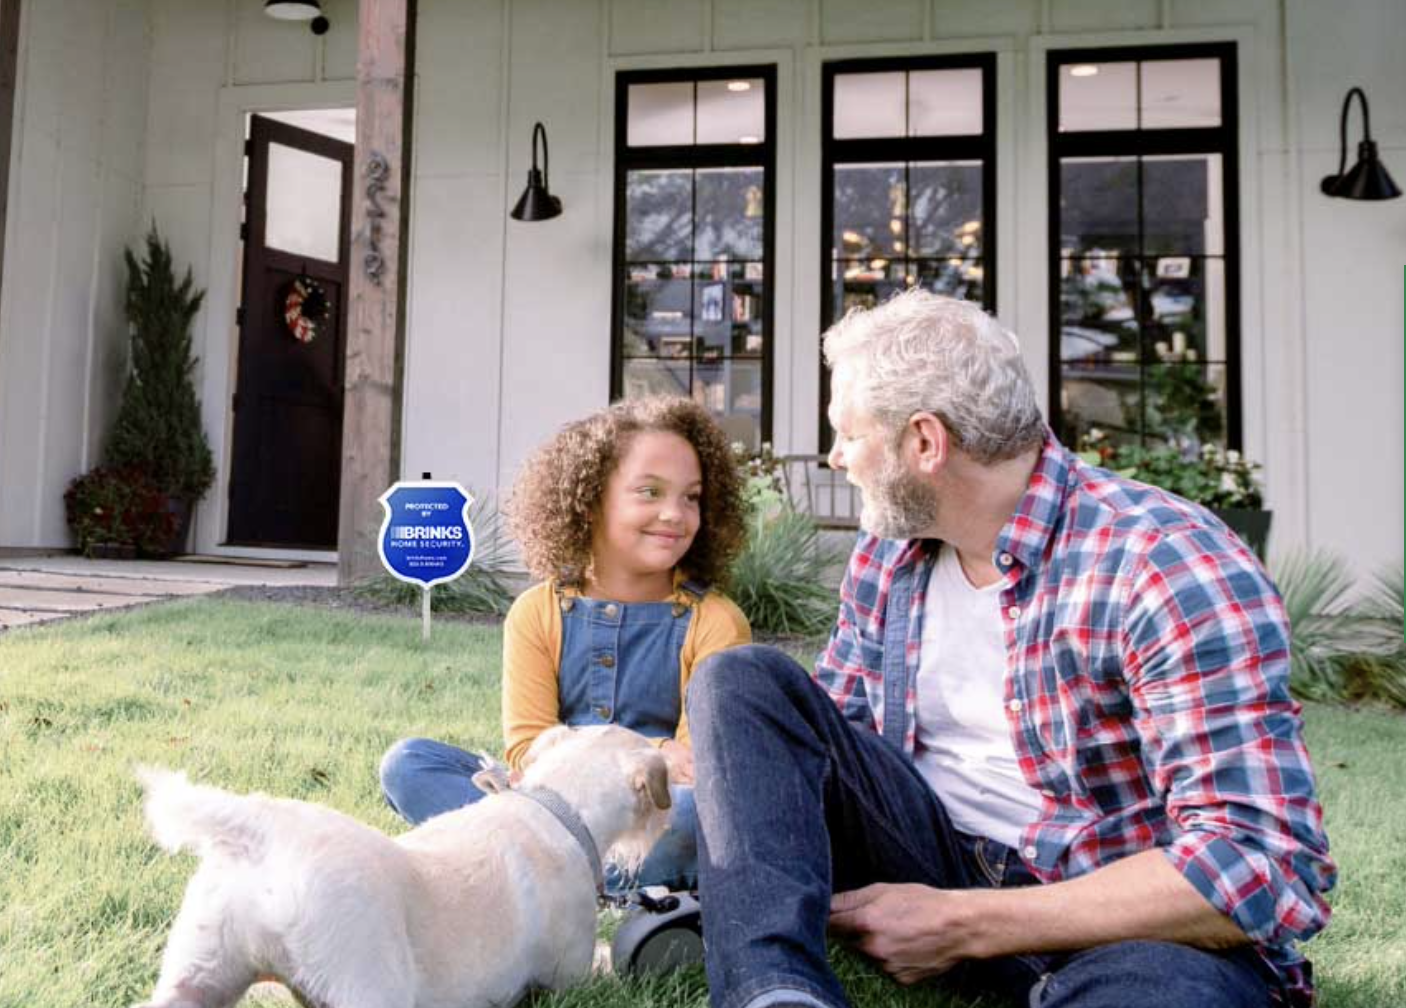 girl, old man, dog, sitting in front of house with Brinks Home Security lawn sign